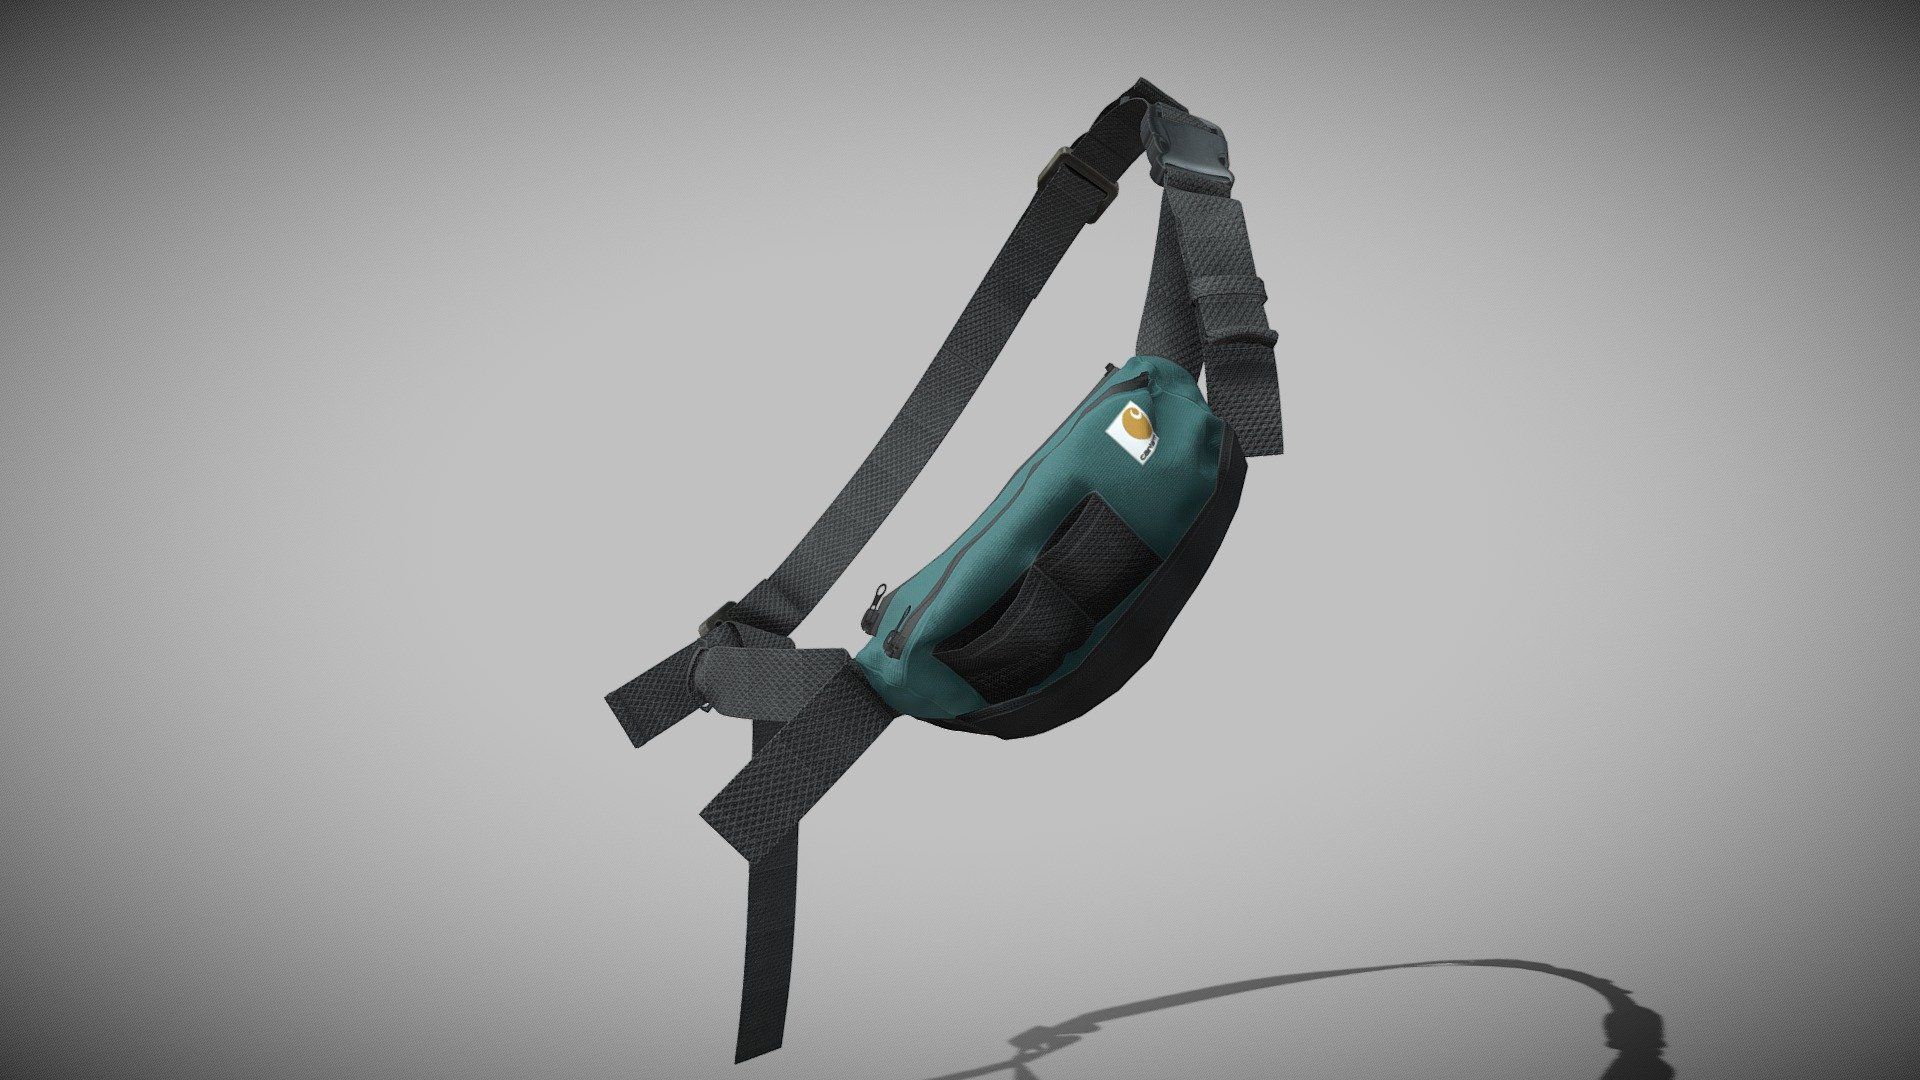 Skater Bag made in marvelous designer and reworked in blender. This model comes in variety of file format! Alembic, FBX, OBJ, Blend, Gltf, Stl with 3 Level of details!

All the Marvelous Designer files are available in the archive.

This model is available in 3 levels of detail!

LowPoly: Verts: 25097 Tris:31556 Mid: Verts: 30763 Tris:41376 High: Verts: 65941 Tris:105452

All my models are made with love for you to enjoy! Cheers! - Skater Bag - Buy Royalty Free 3D model by DGNS (@GuillaumeDGNS) 3d model